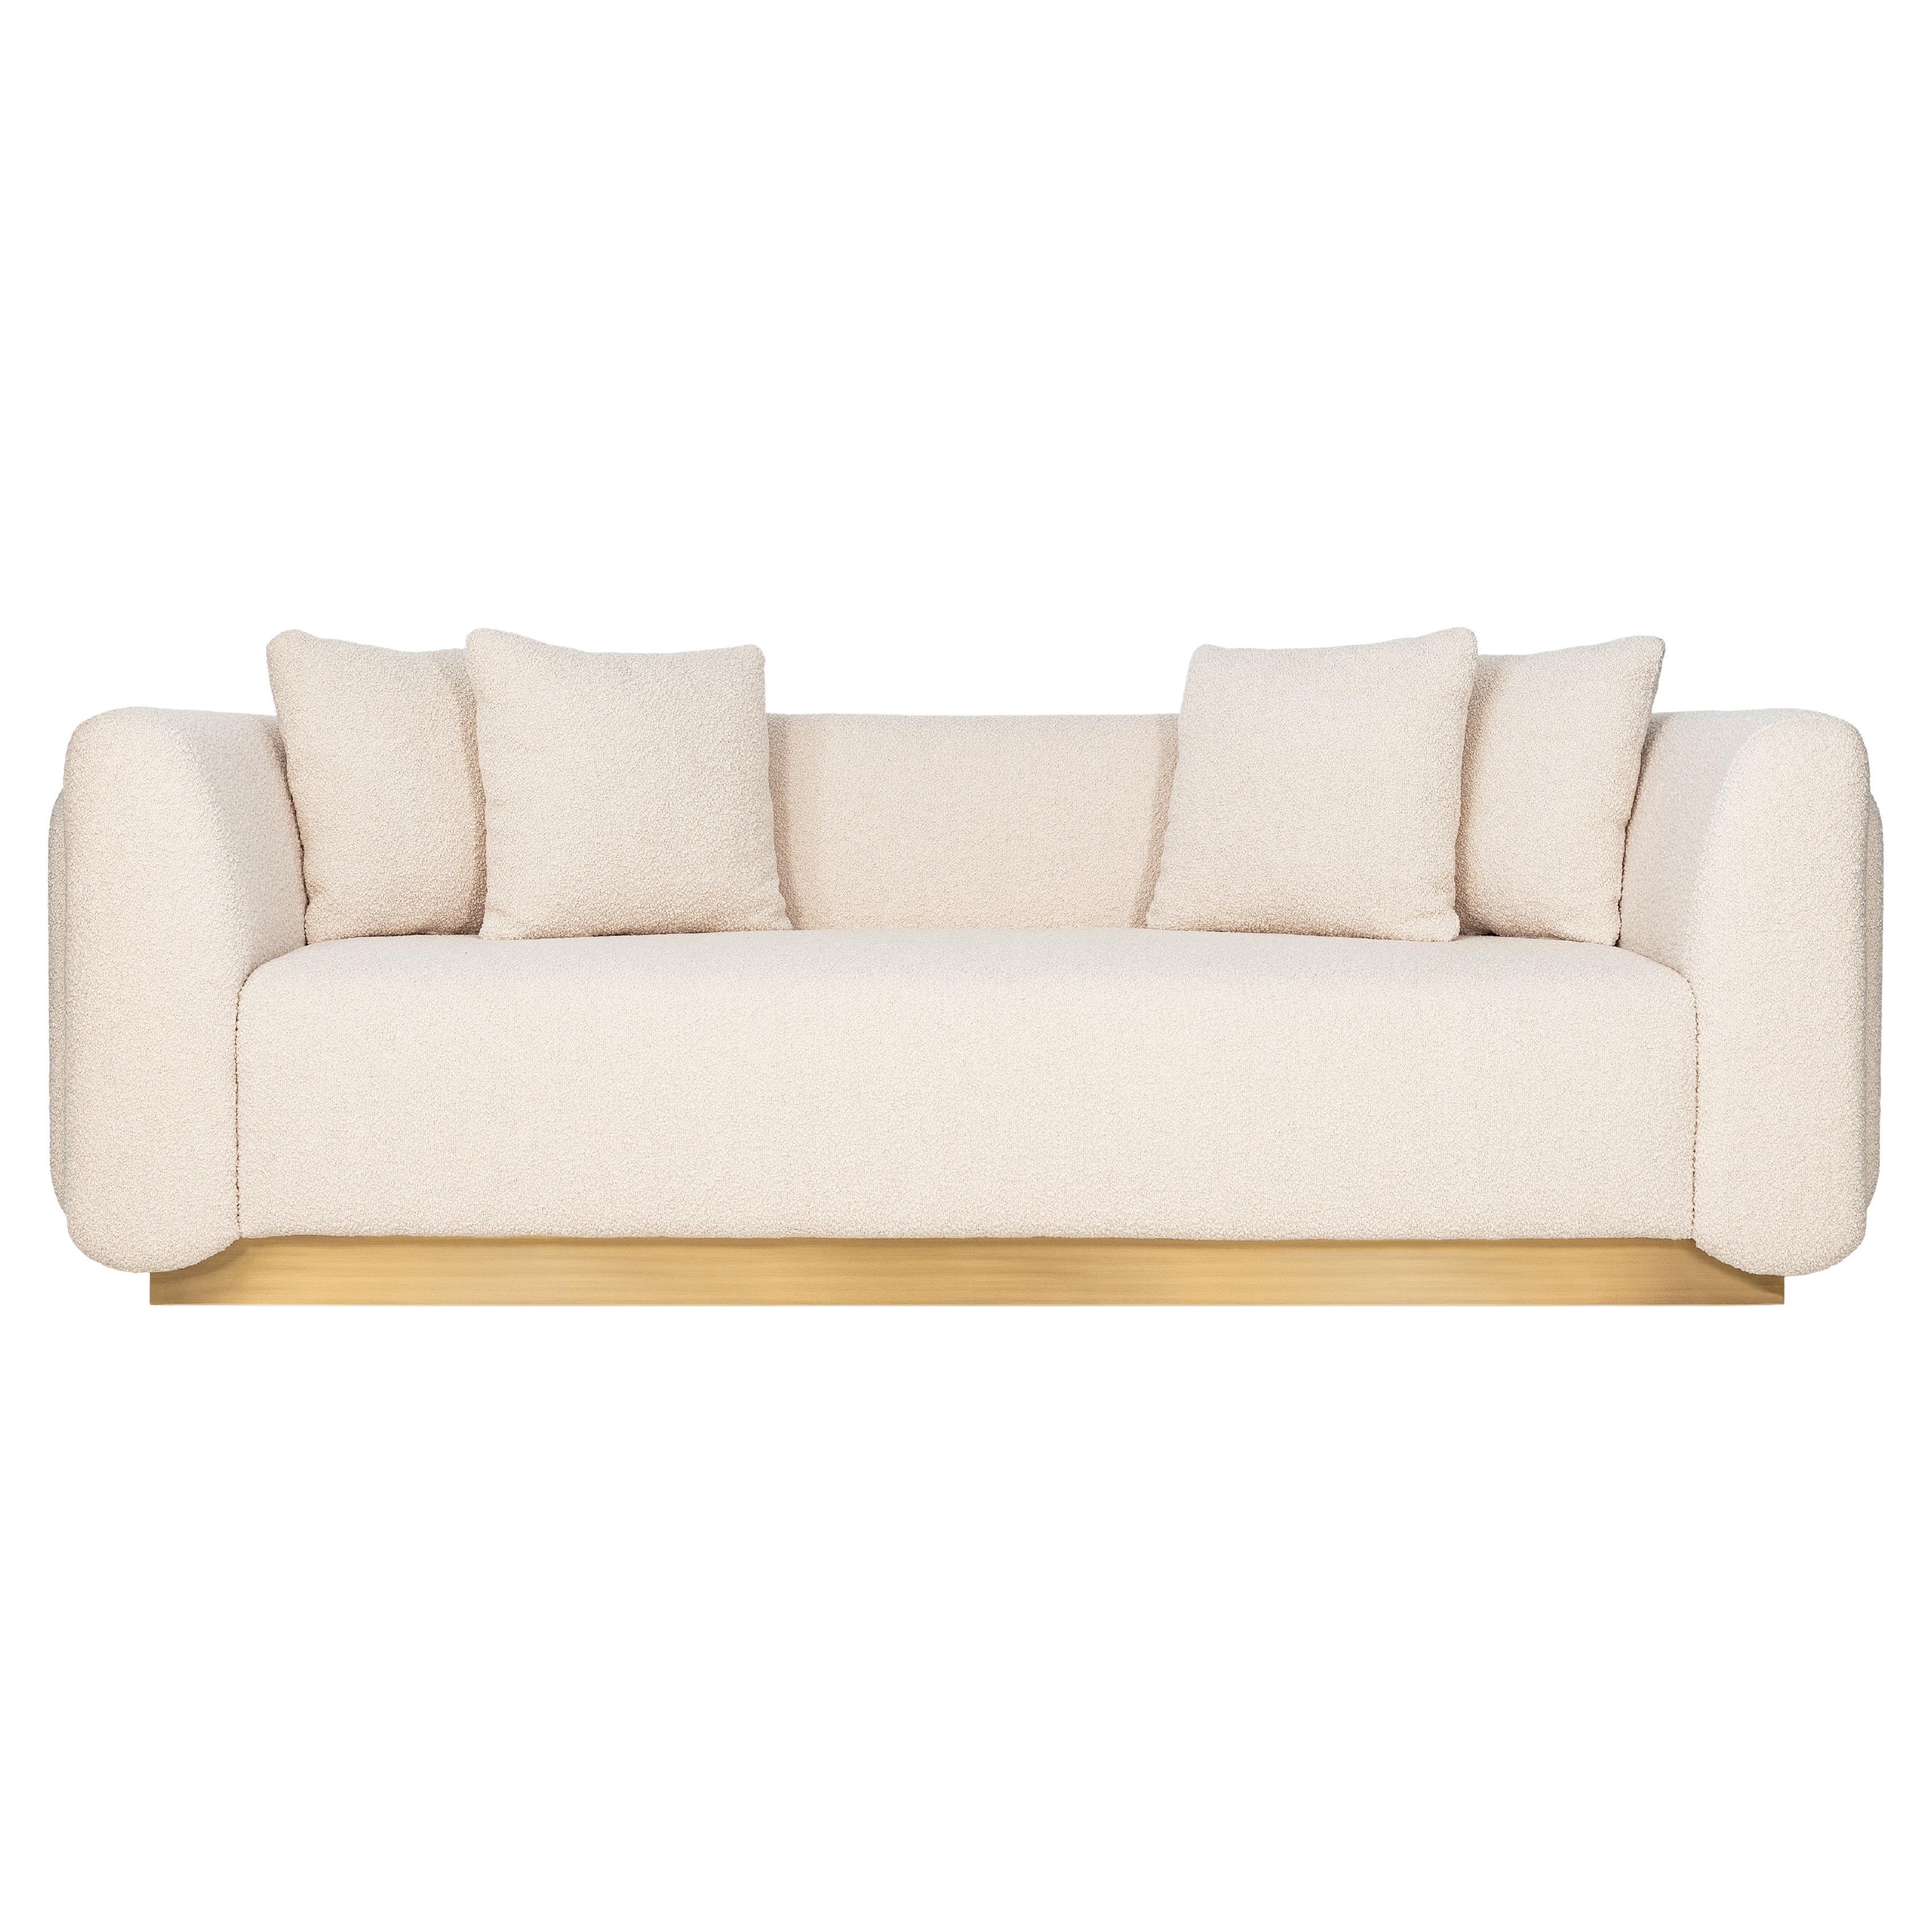 Foz 3 Seat Sofa by InsidherLand For Sale